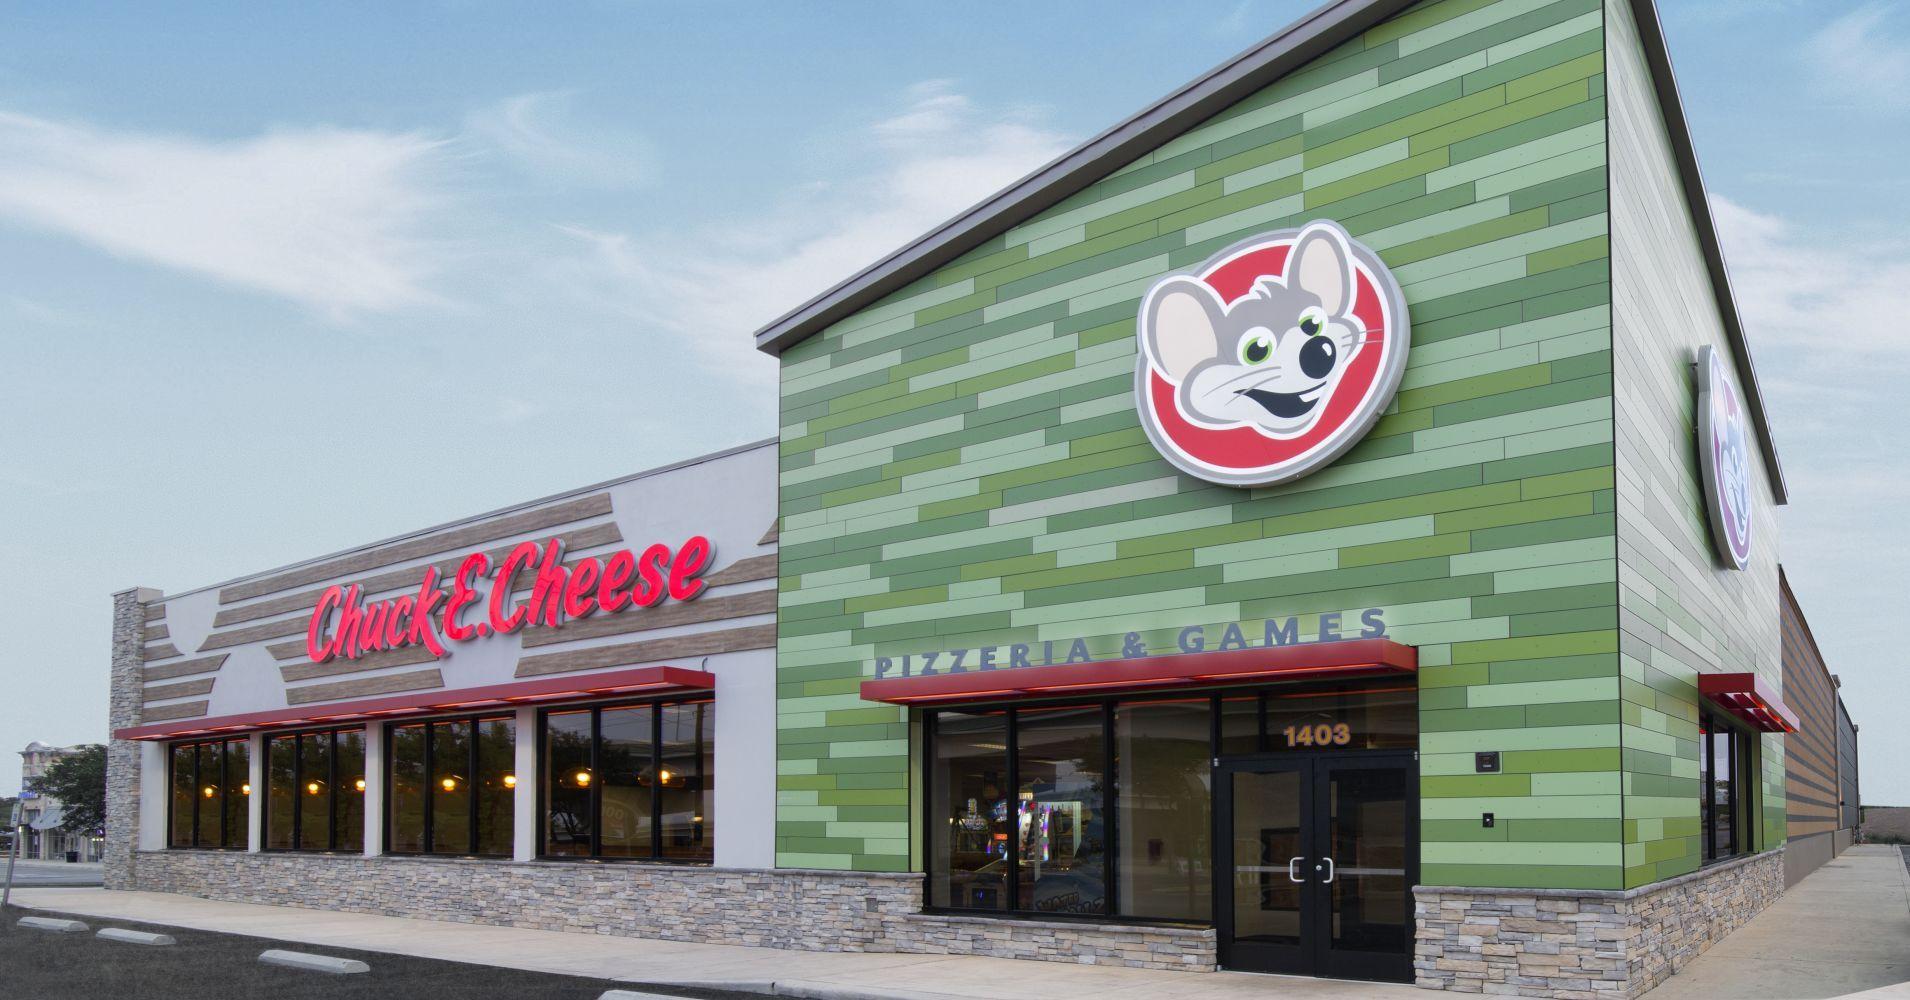 Restrurant Food Store Logo - Chuck E. Cheese's is getting a major redesign